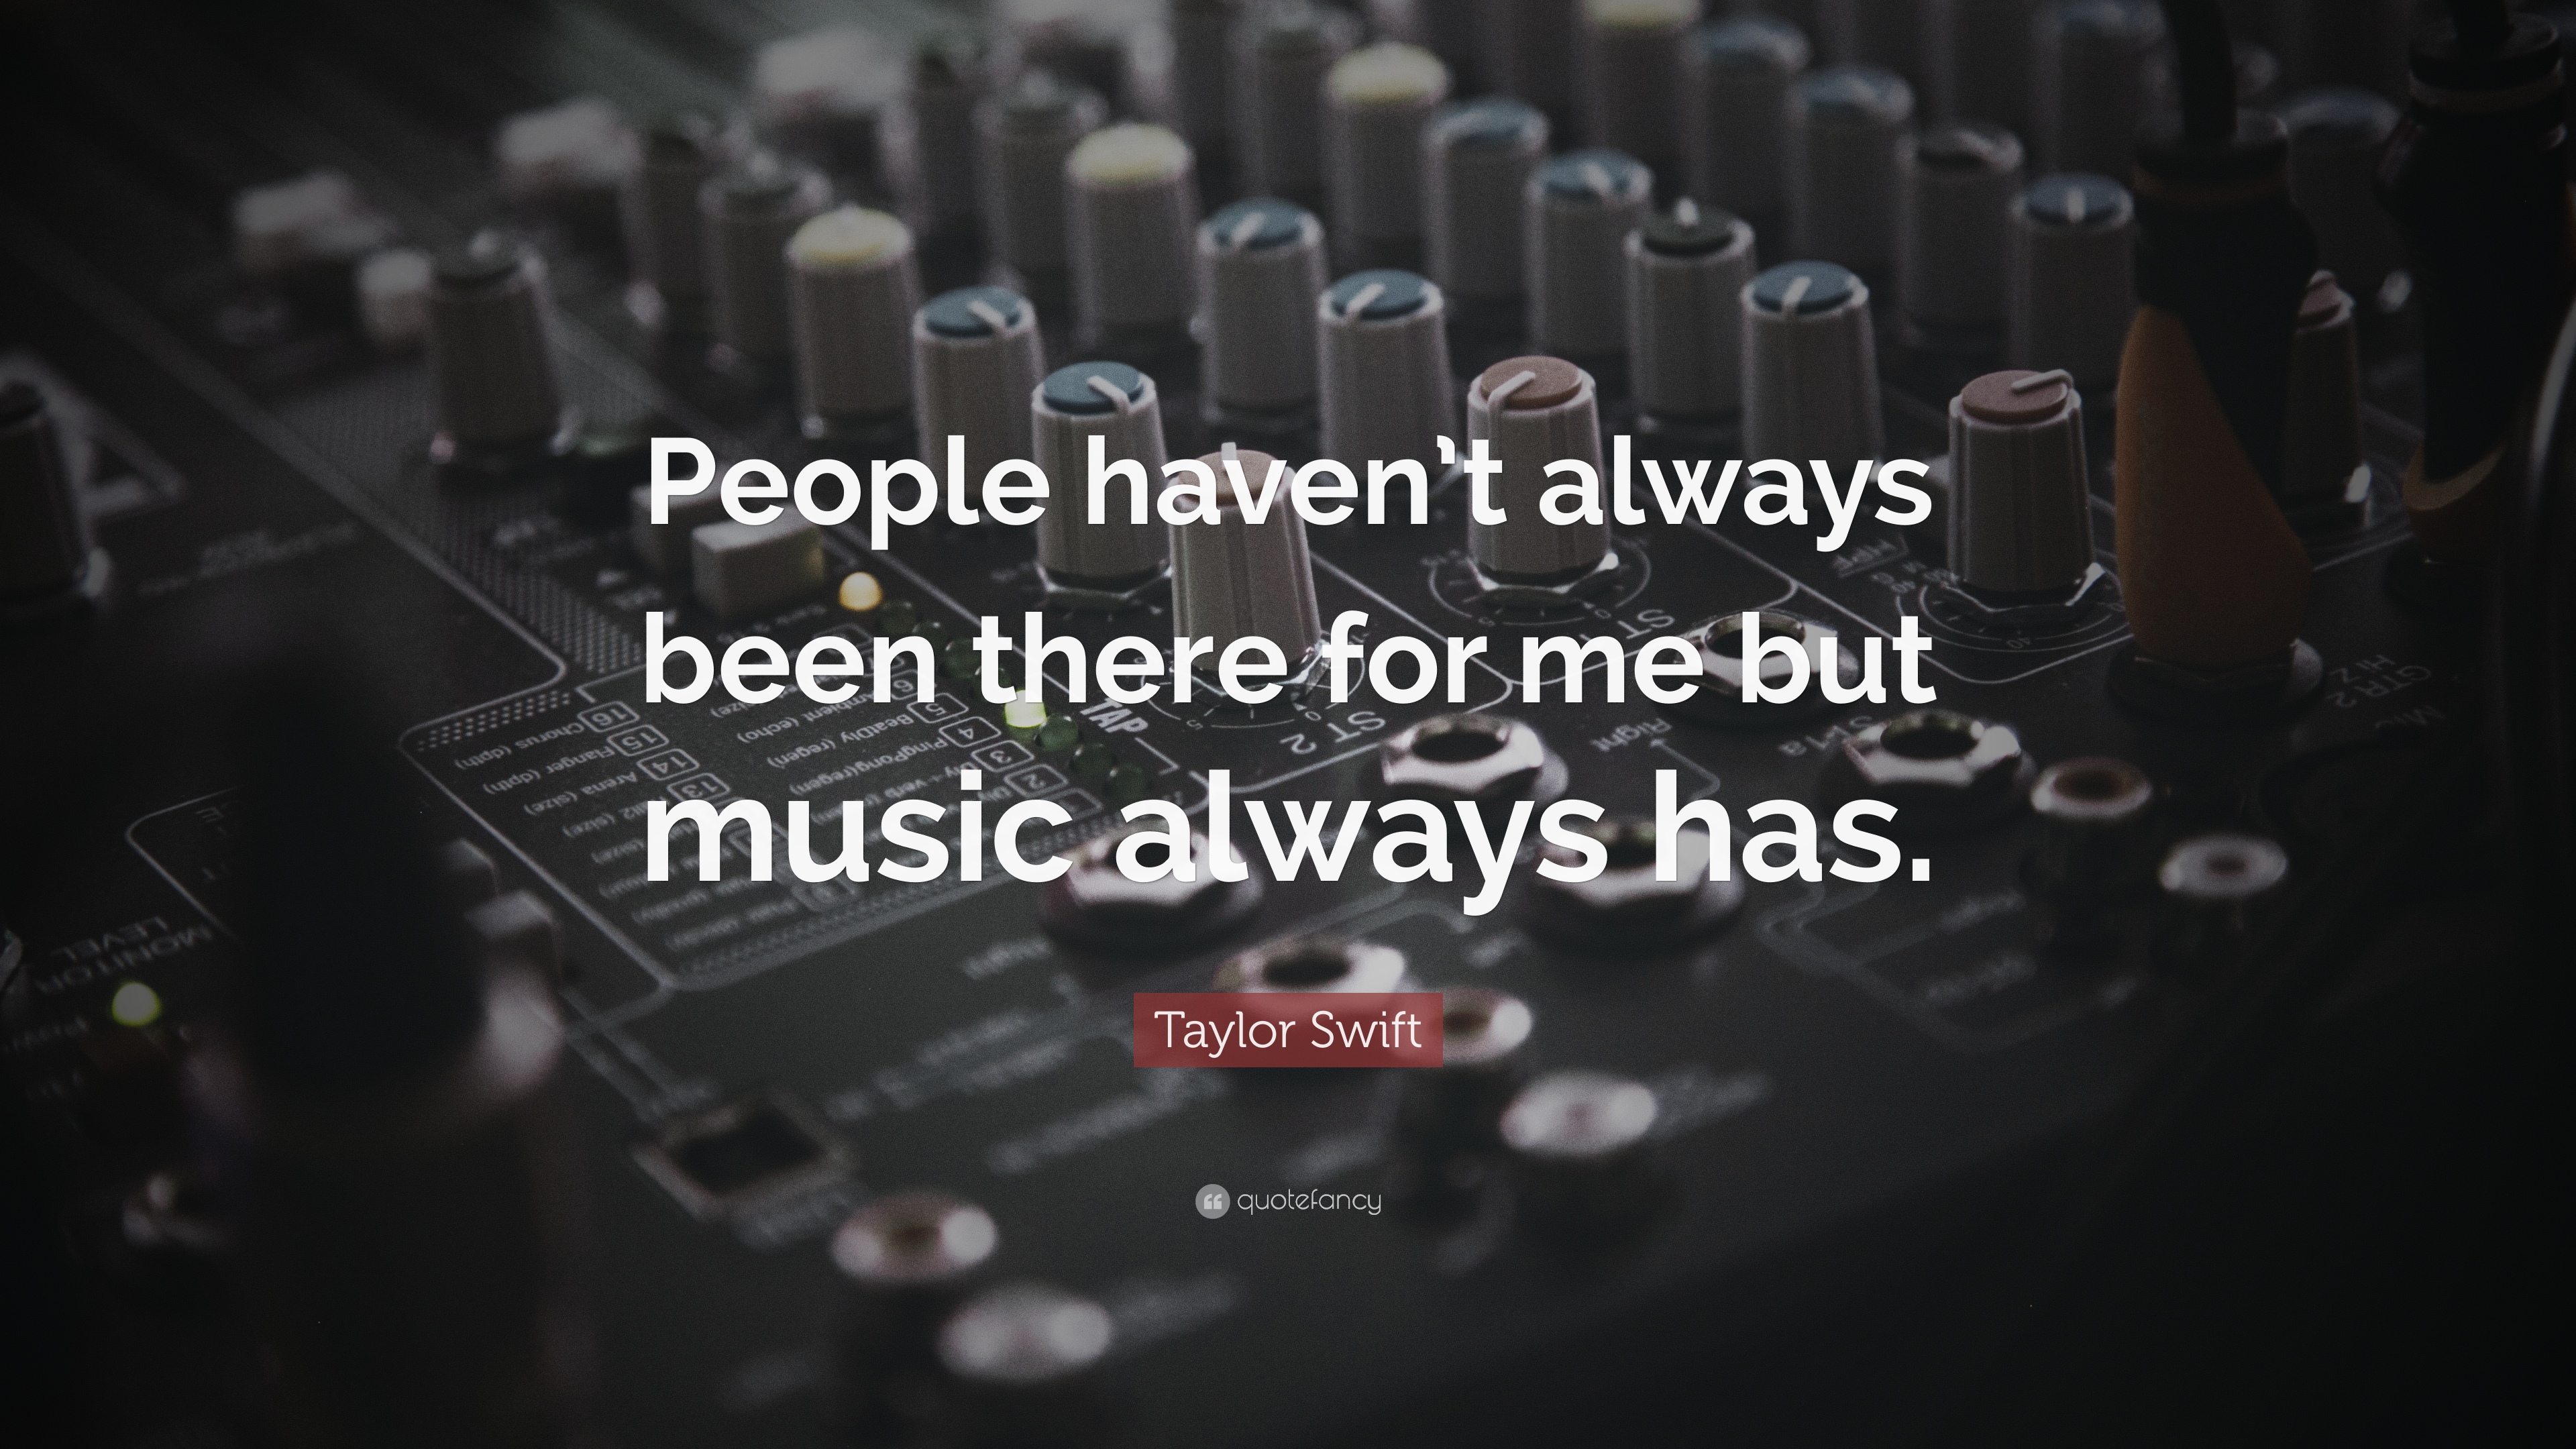 People haven’t always been there for me but music always has. Taylor Swift